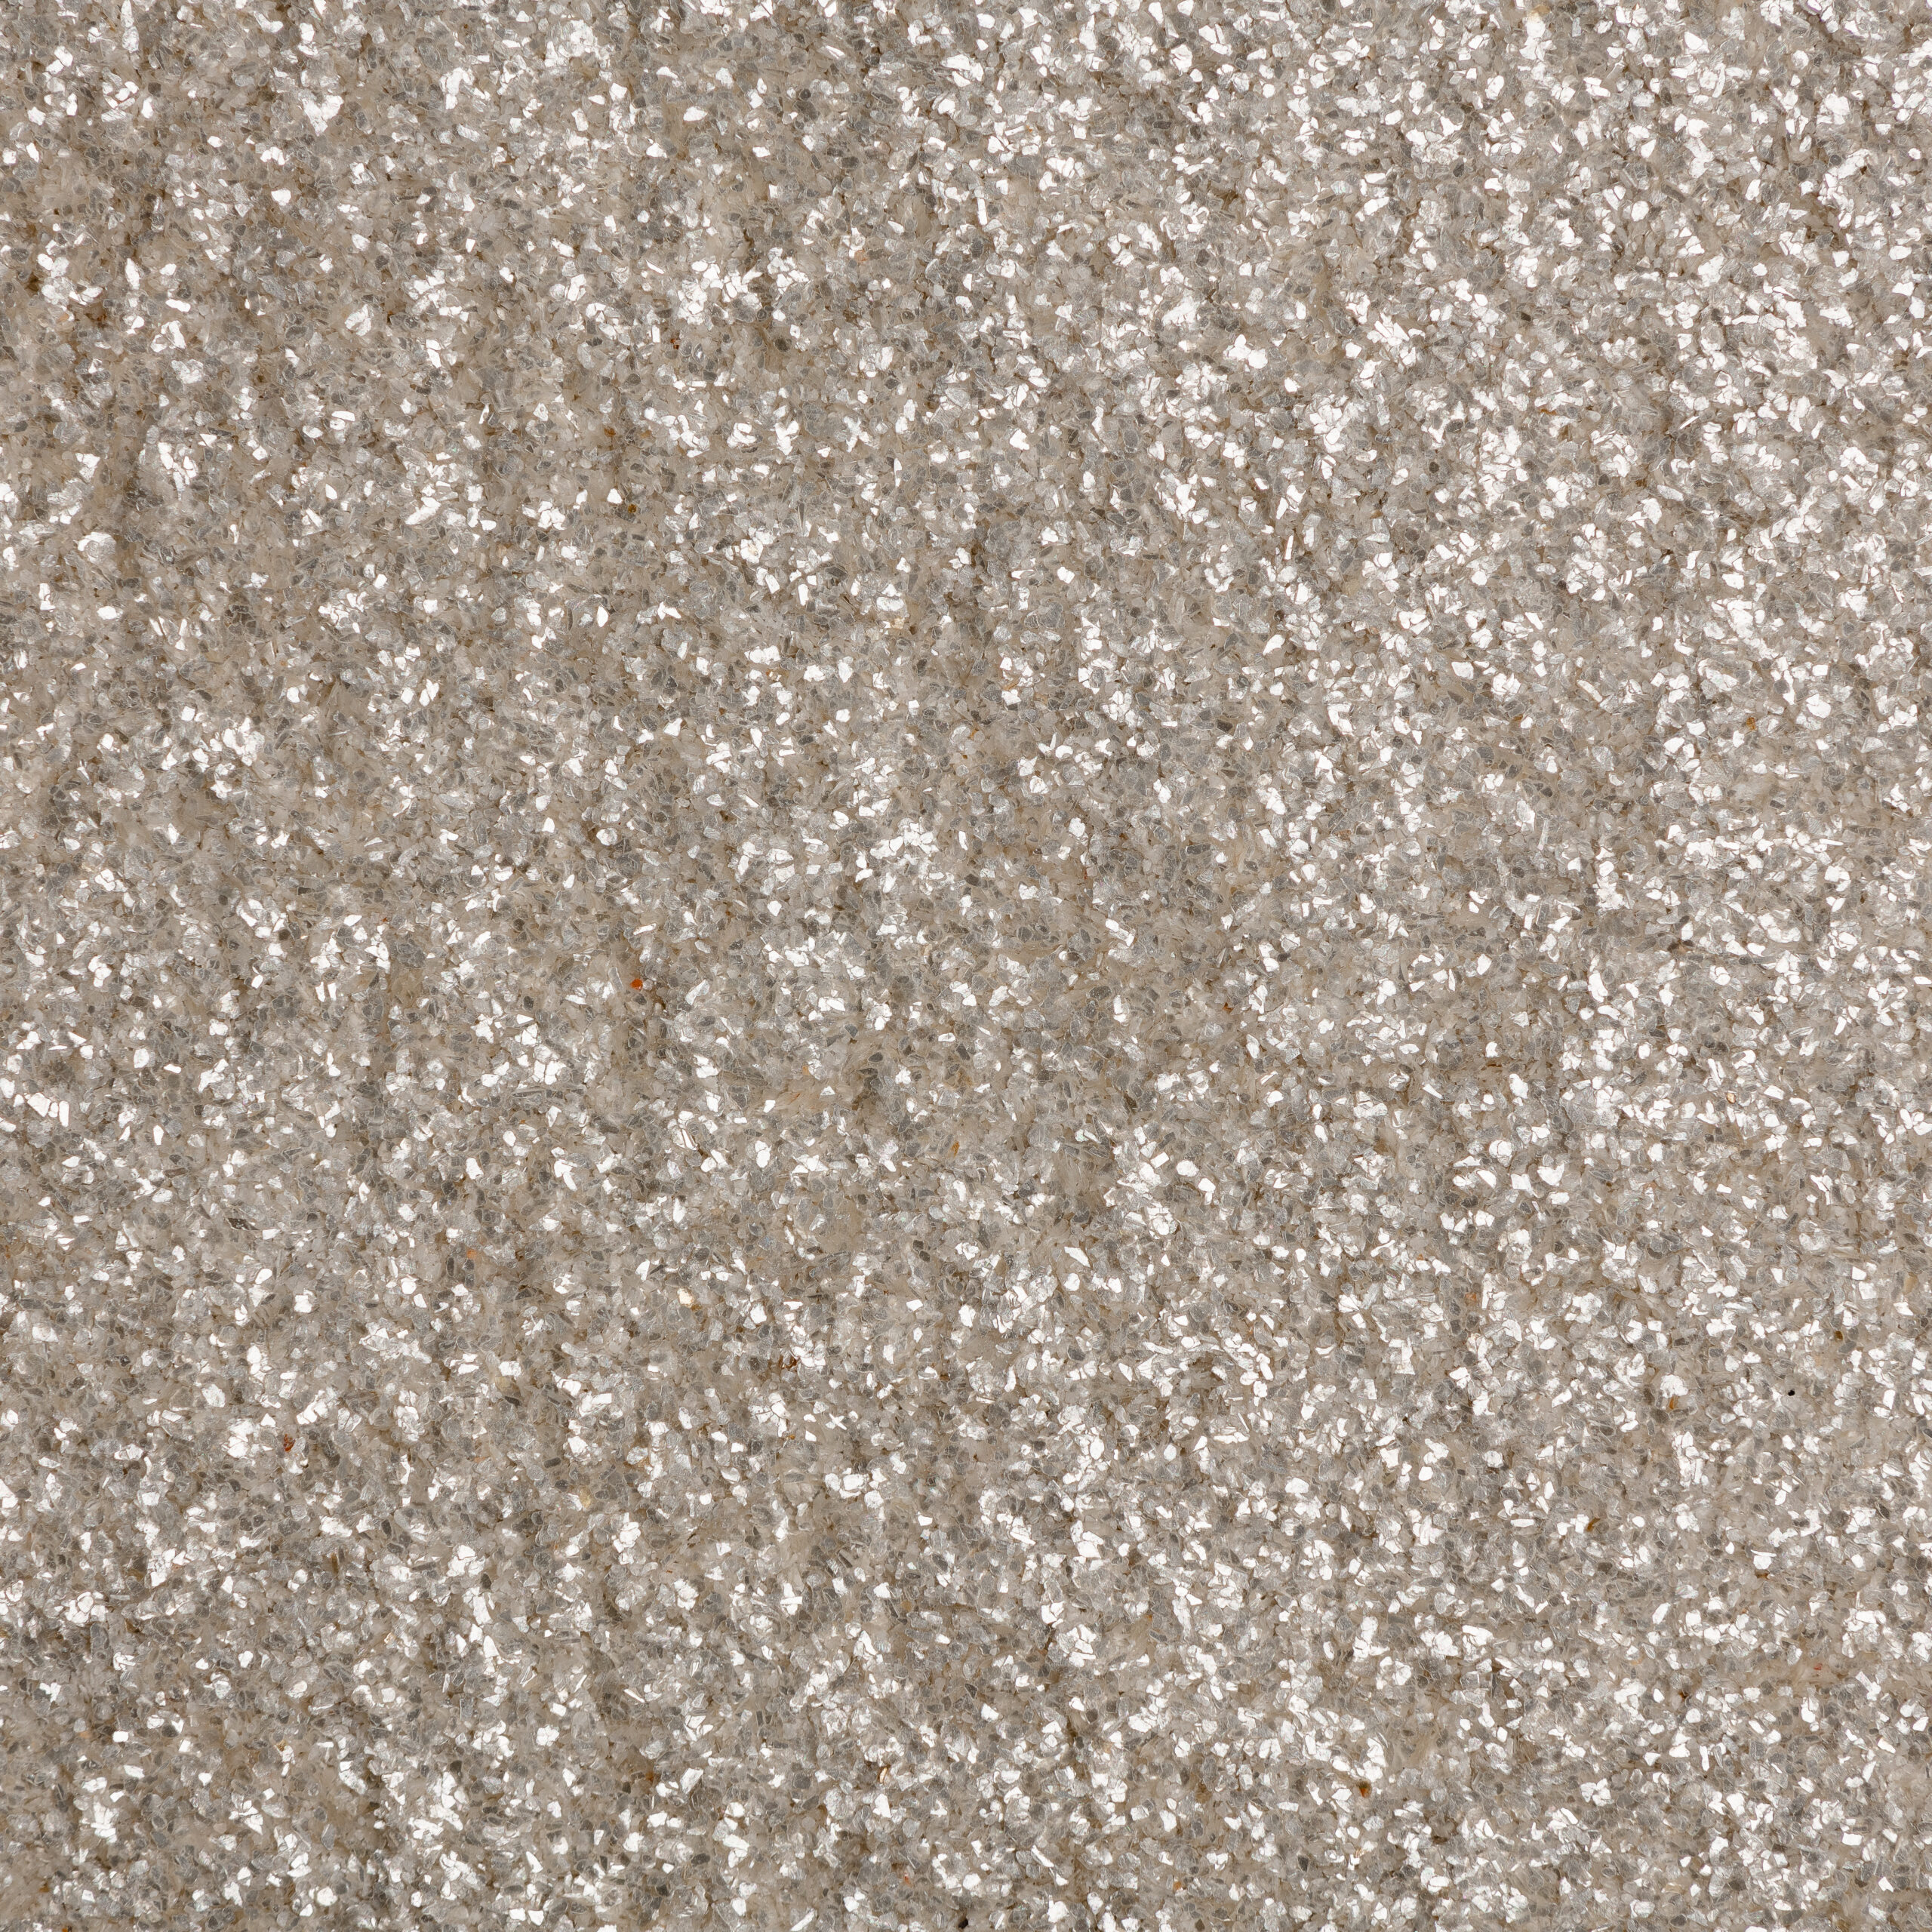 Natural Mica Flakes for Epoxy Floor Paint - China Natural Mica Flakes, Mica